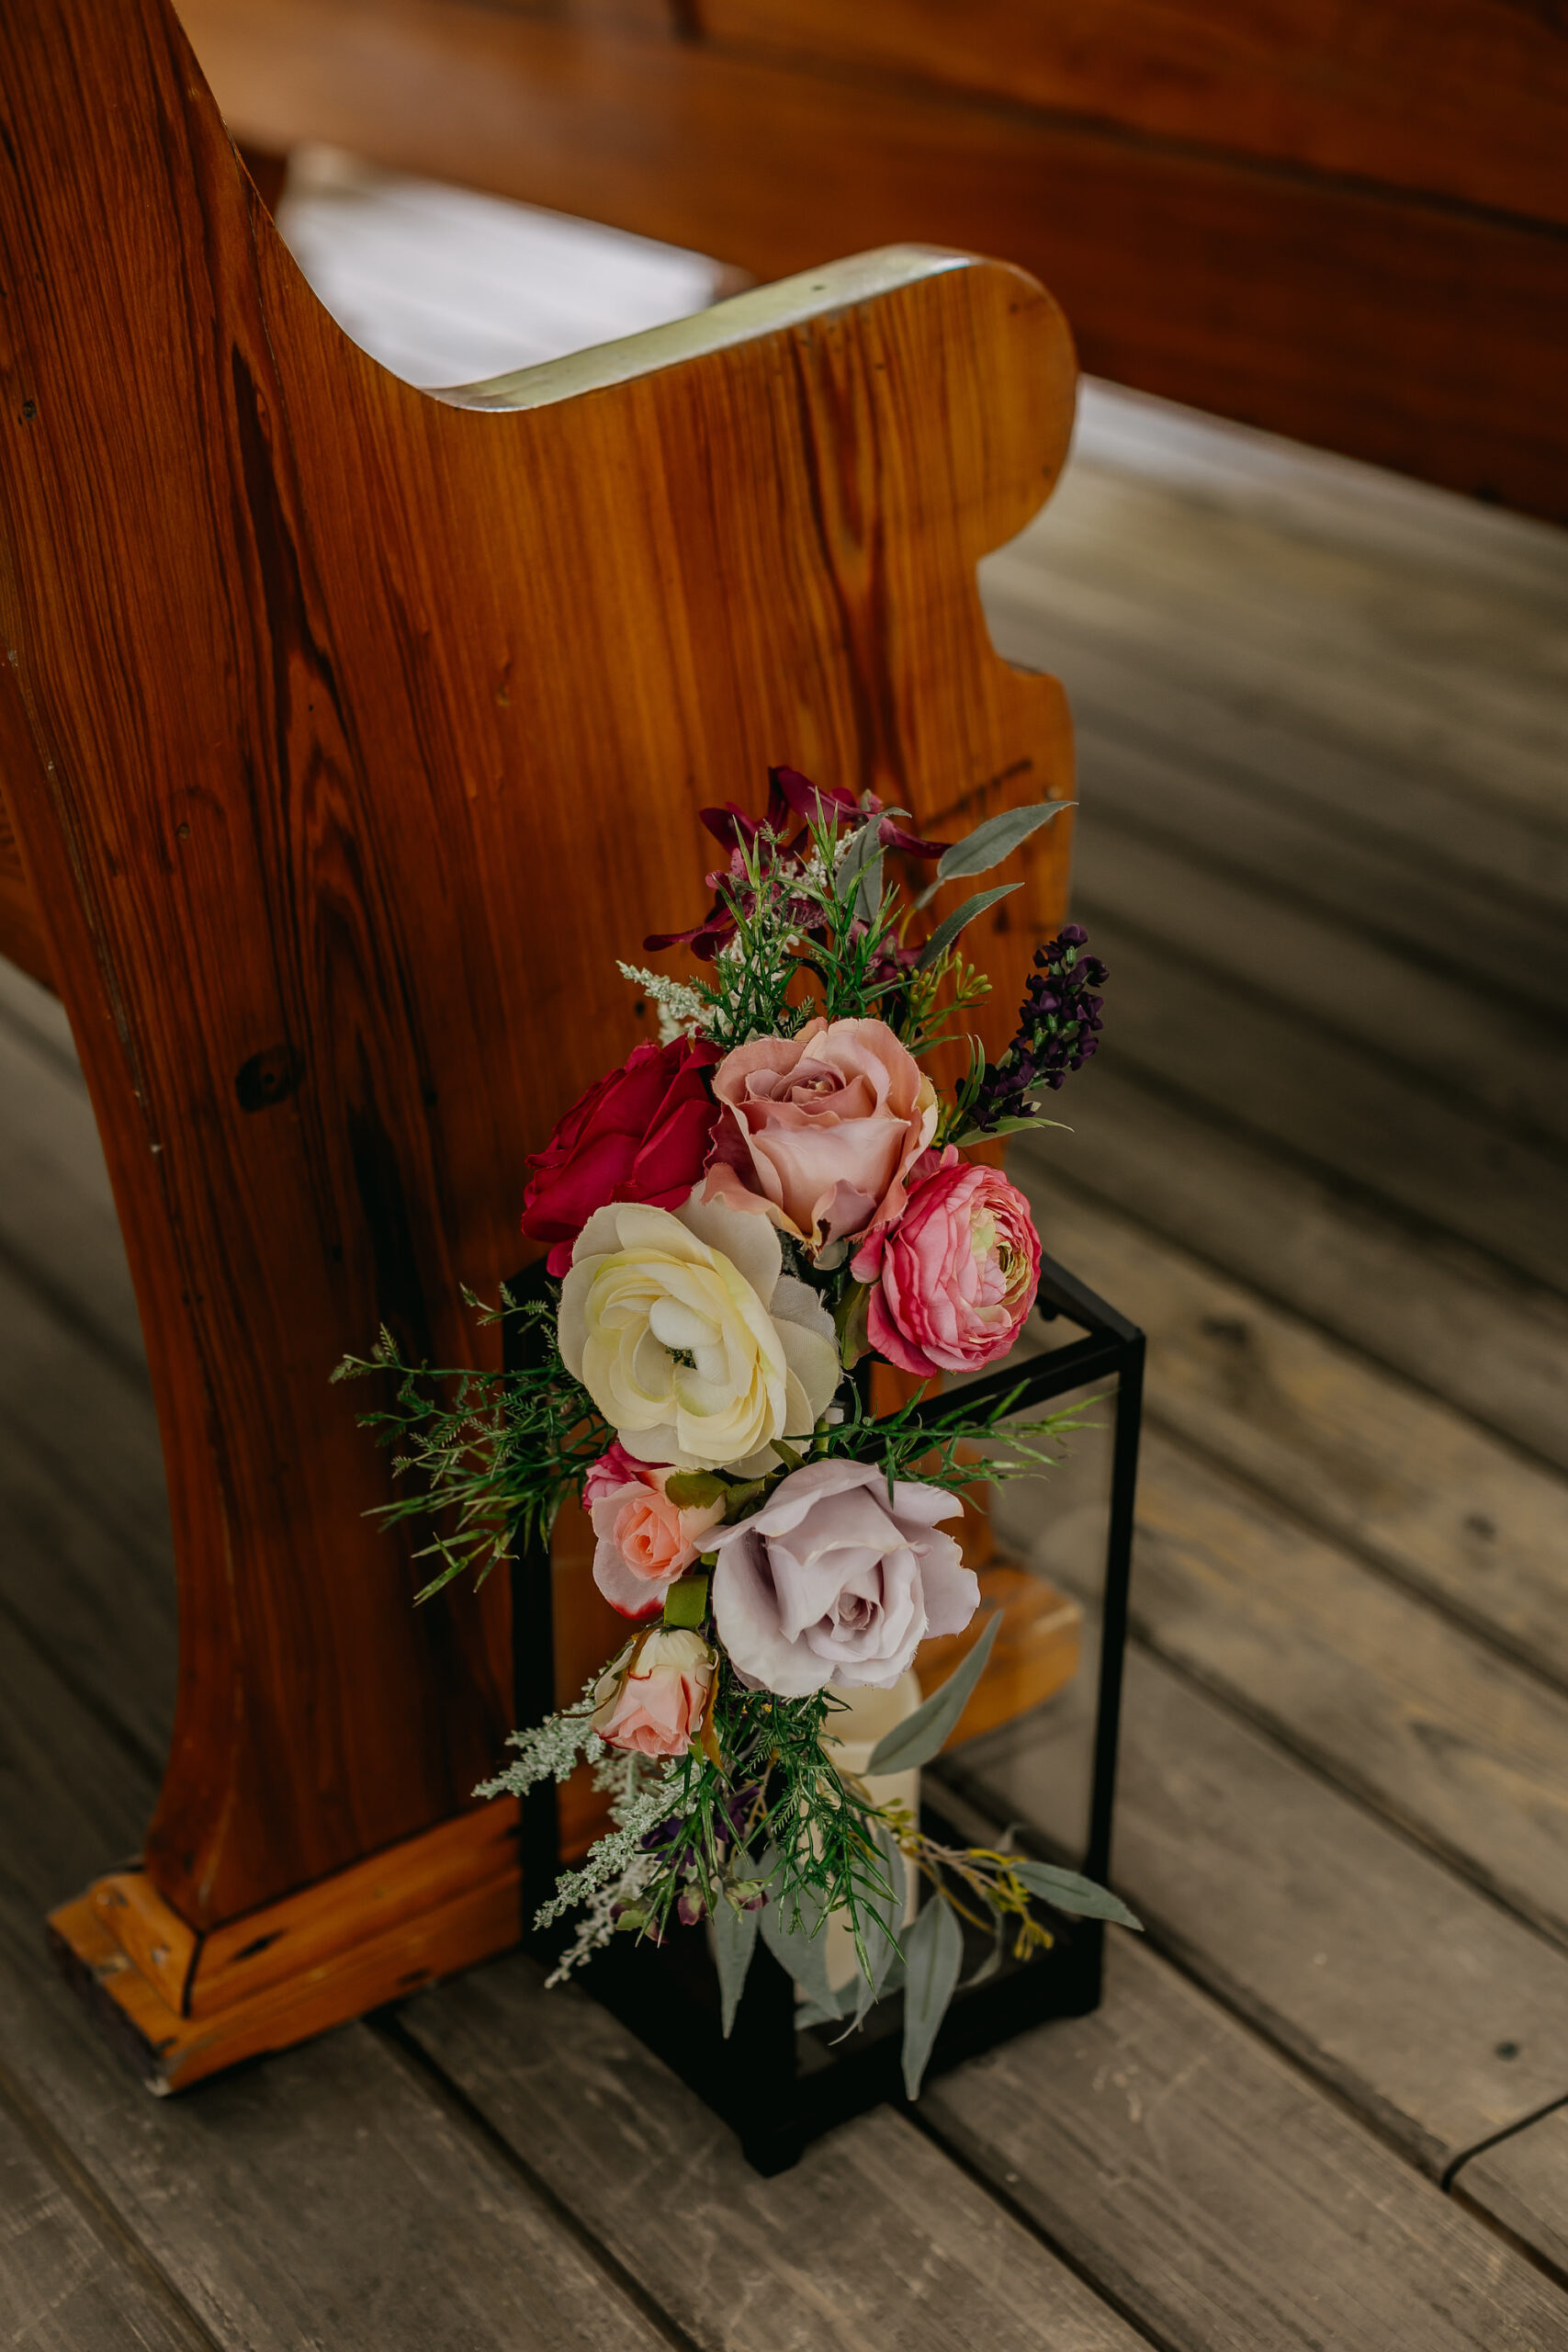 Black Lantern Rose, Peony, and Greenery Wedding Ceremony Aisle Floral Arrangements | Modern Rustic Ceremony Ideas | Tampa Bay Florist Monarch Events and Design